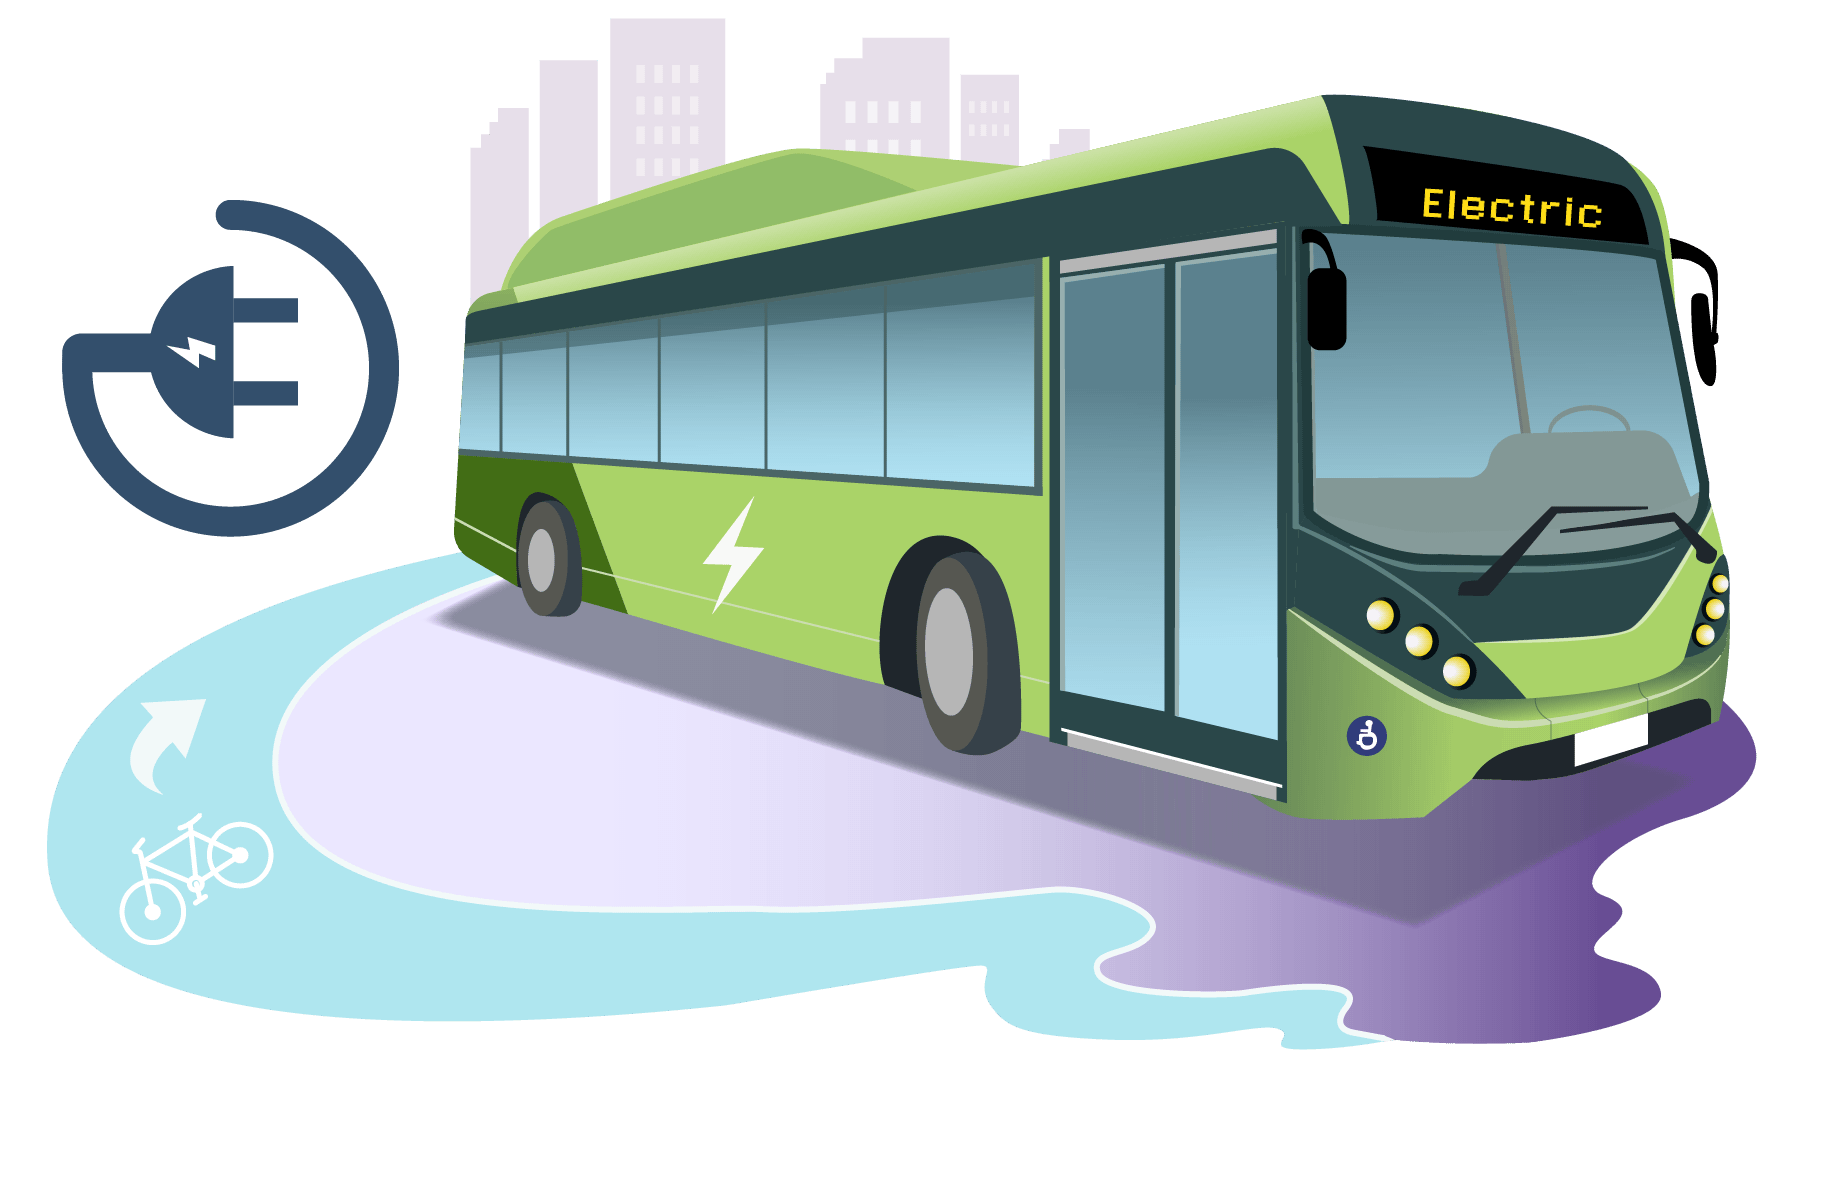 Illustration of a green electric bus with city on the back and a plug on the side.